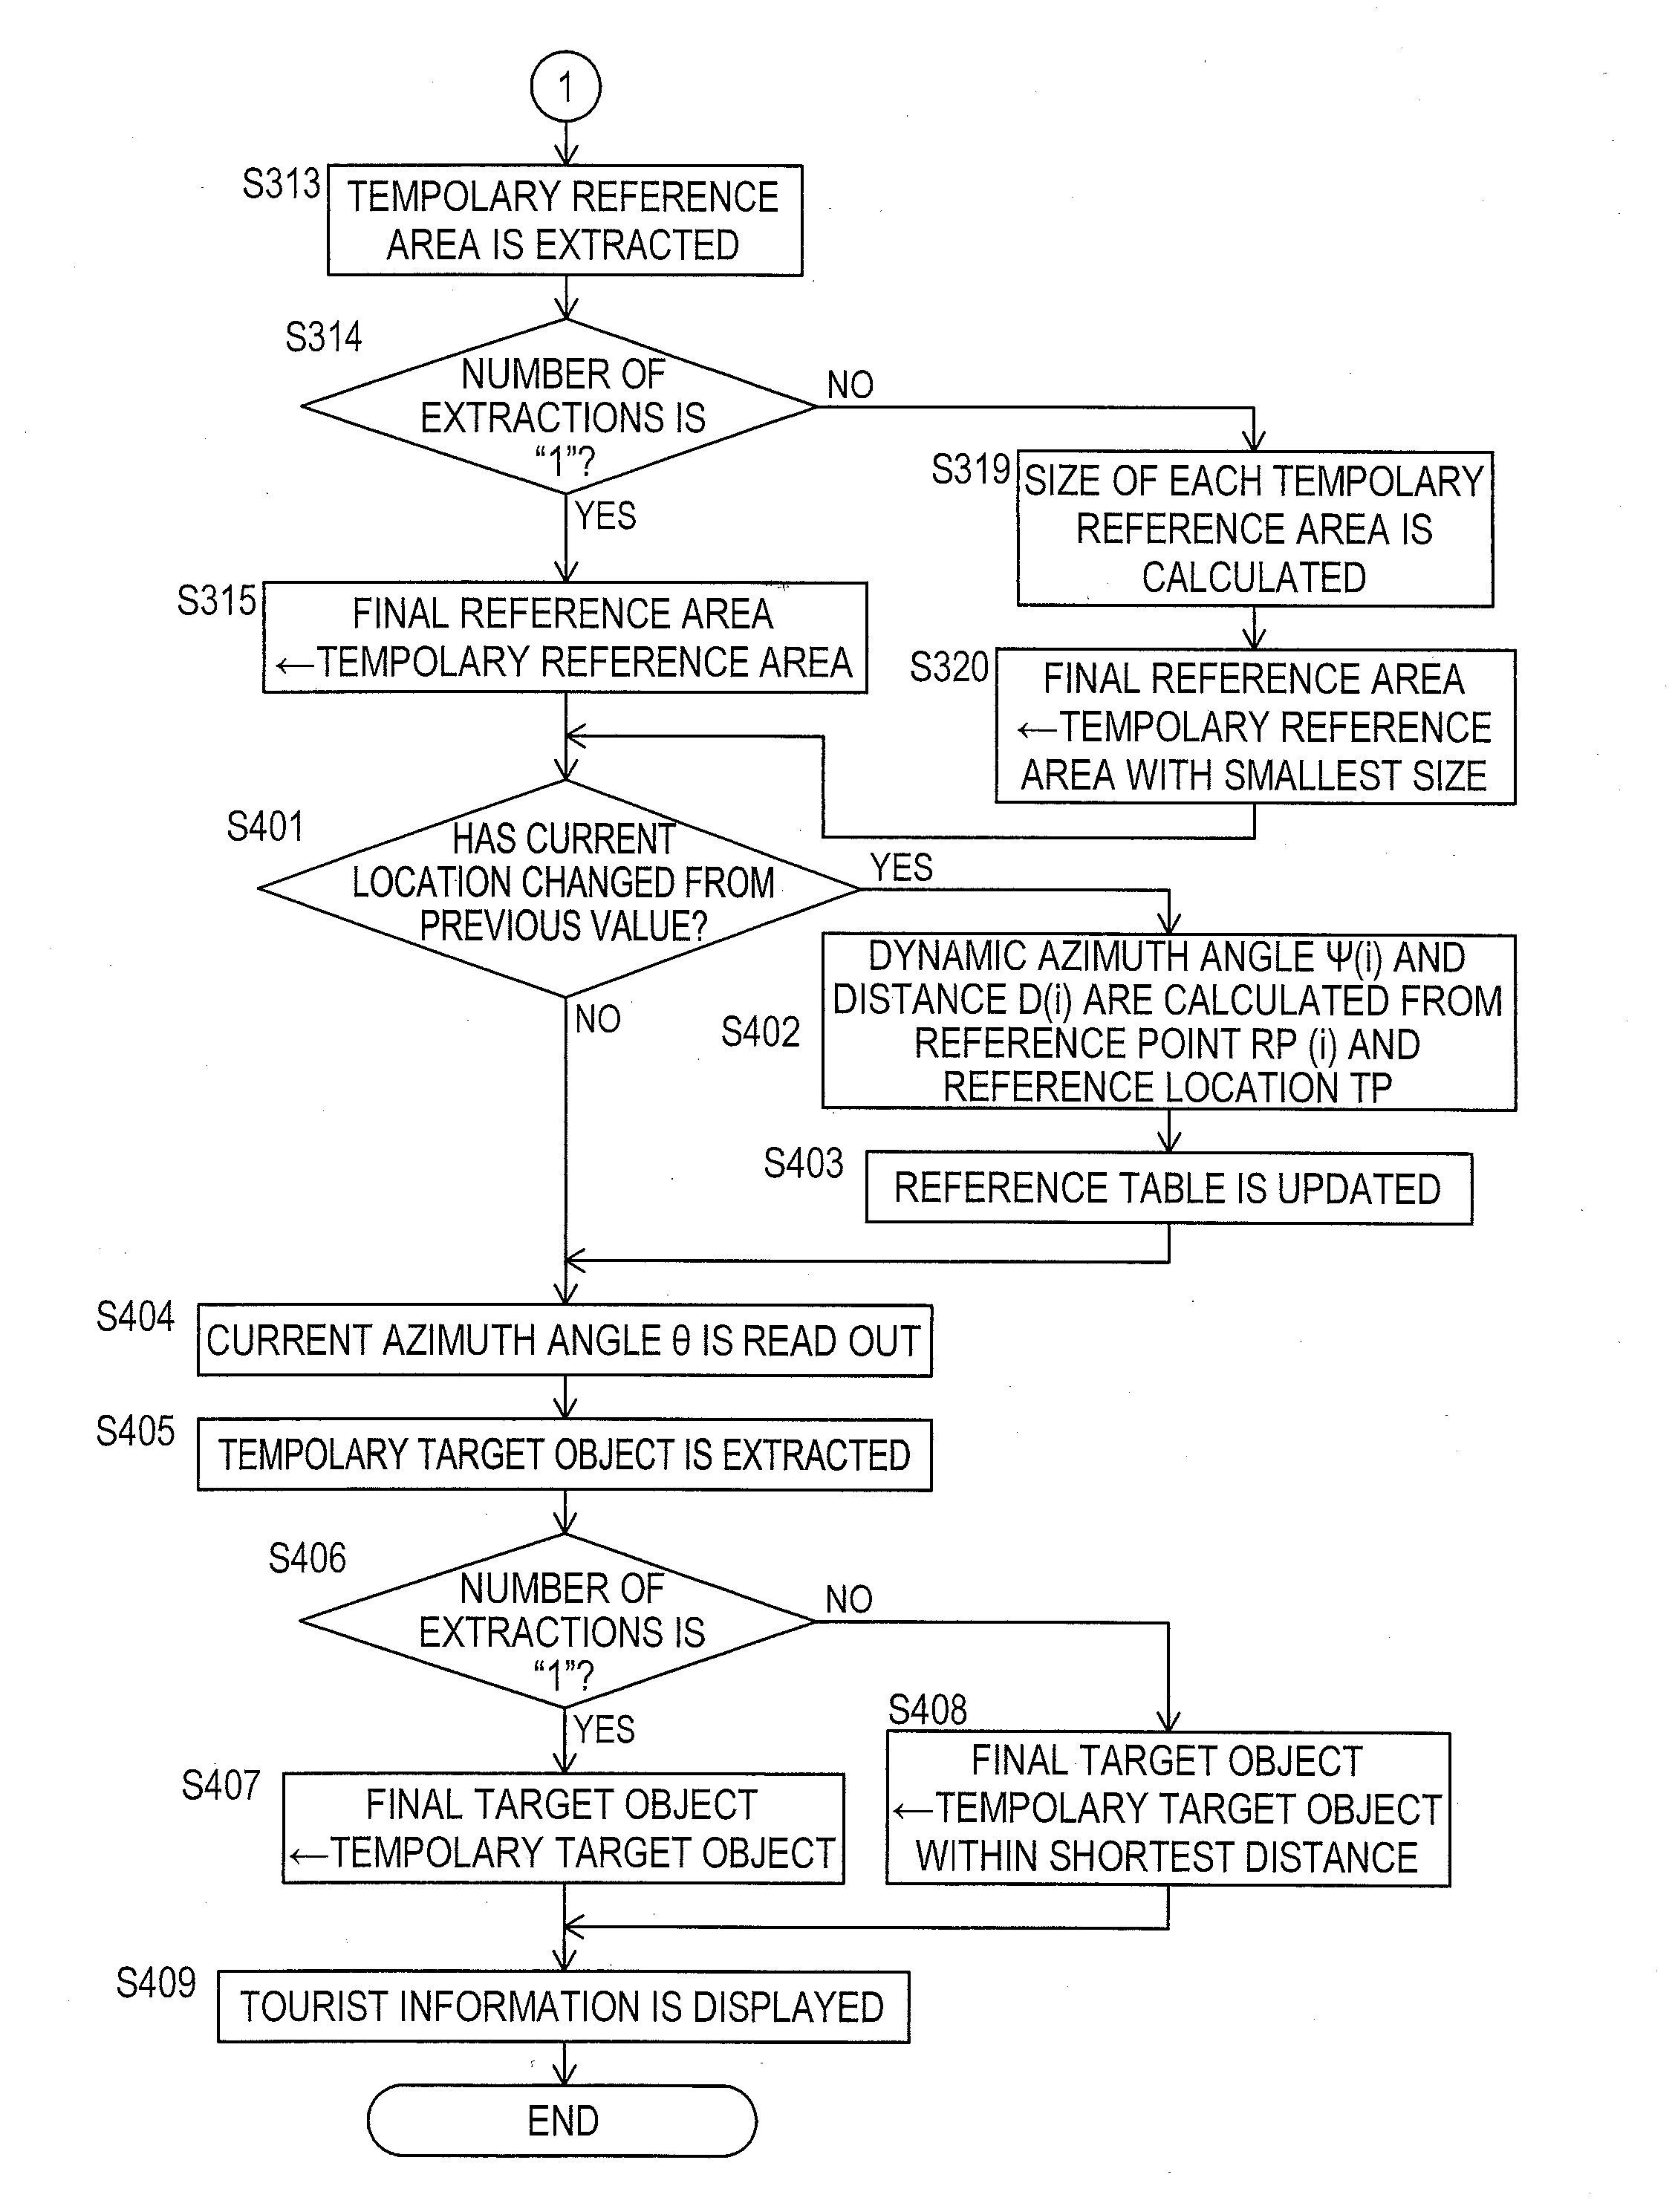 User portable terminal for retrieving target geographical information using a user's current location and current azimuth angle and providing such to user